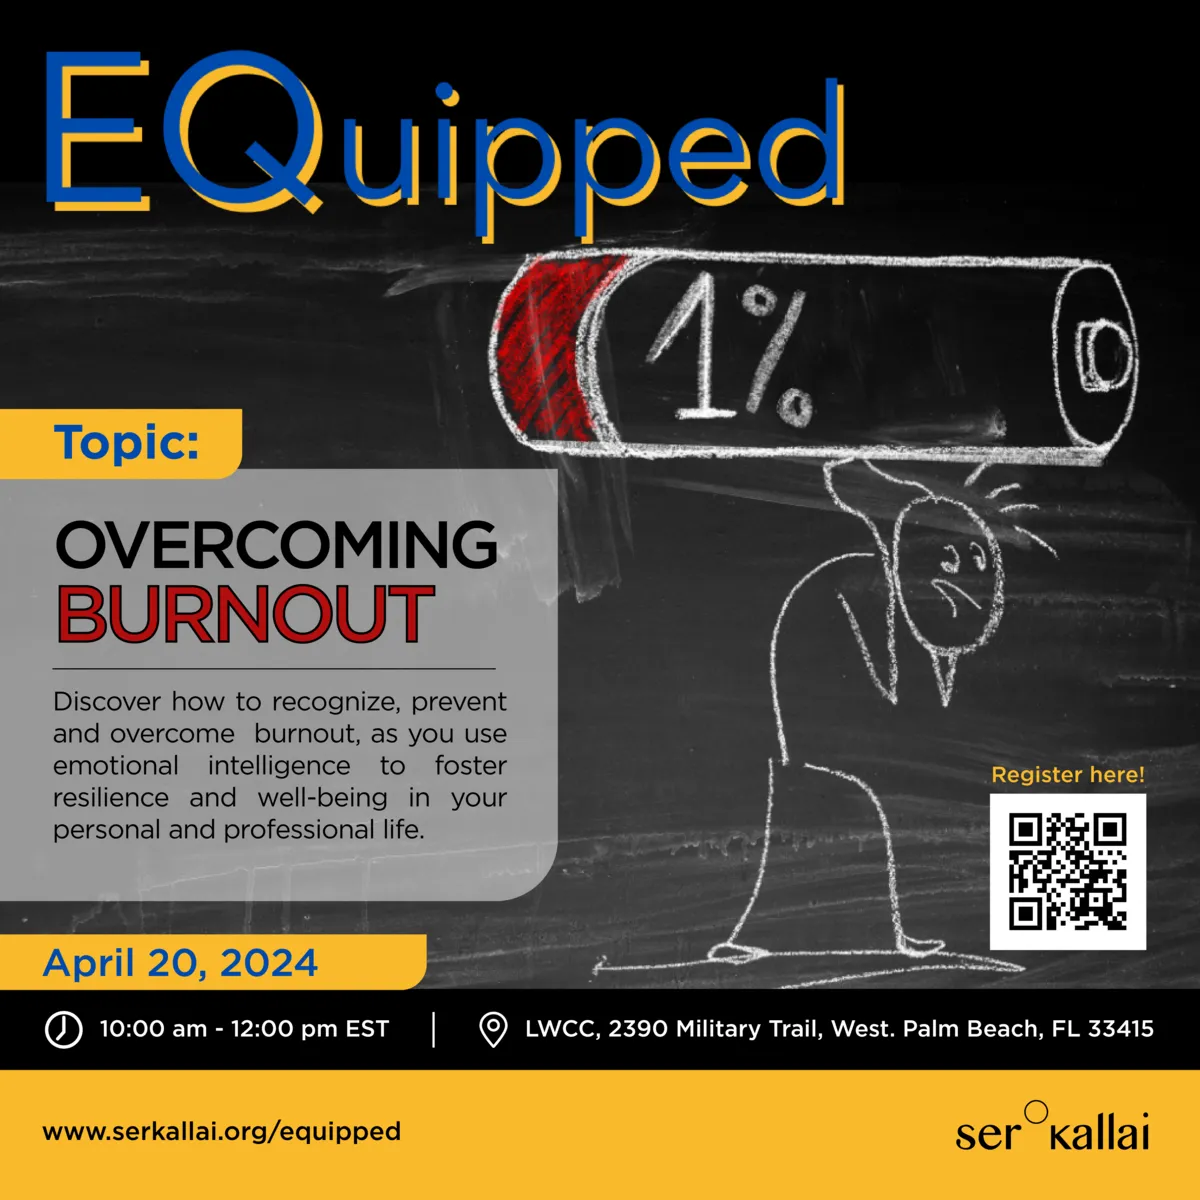 EQuipped - Overcoming Burnout (FL)